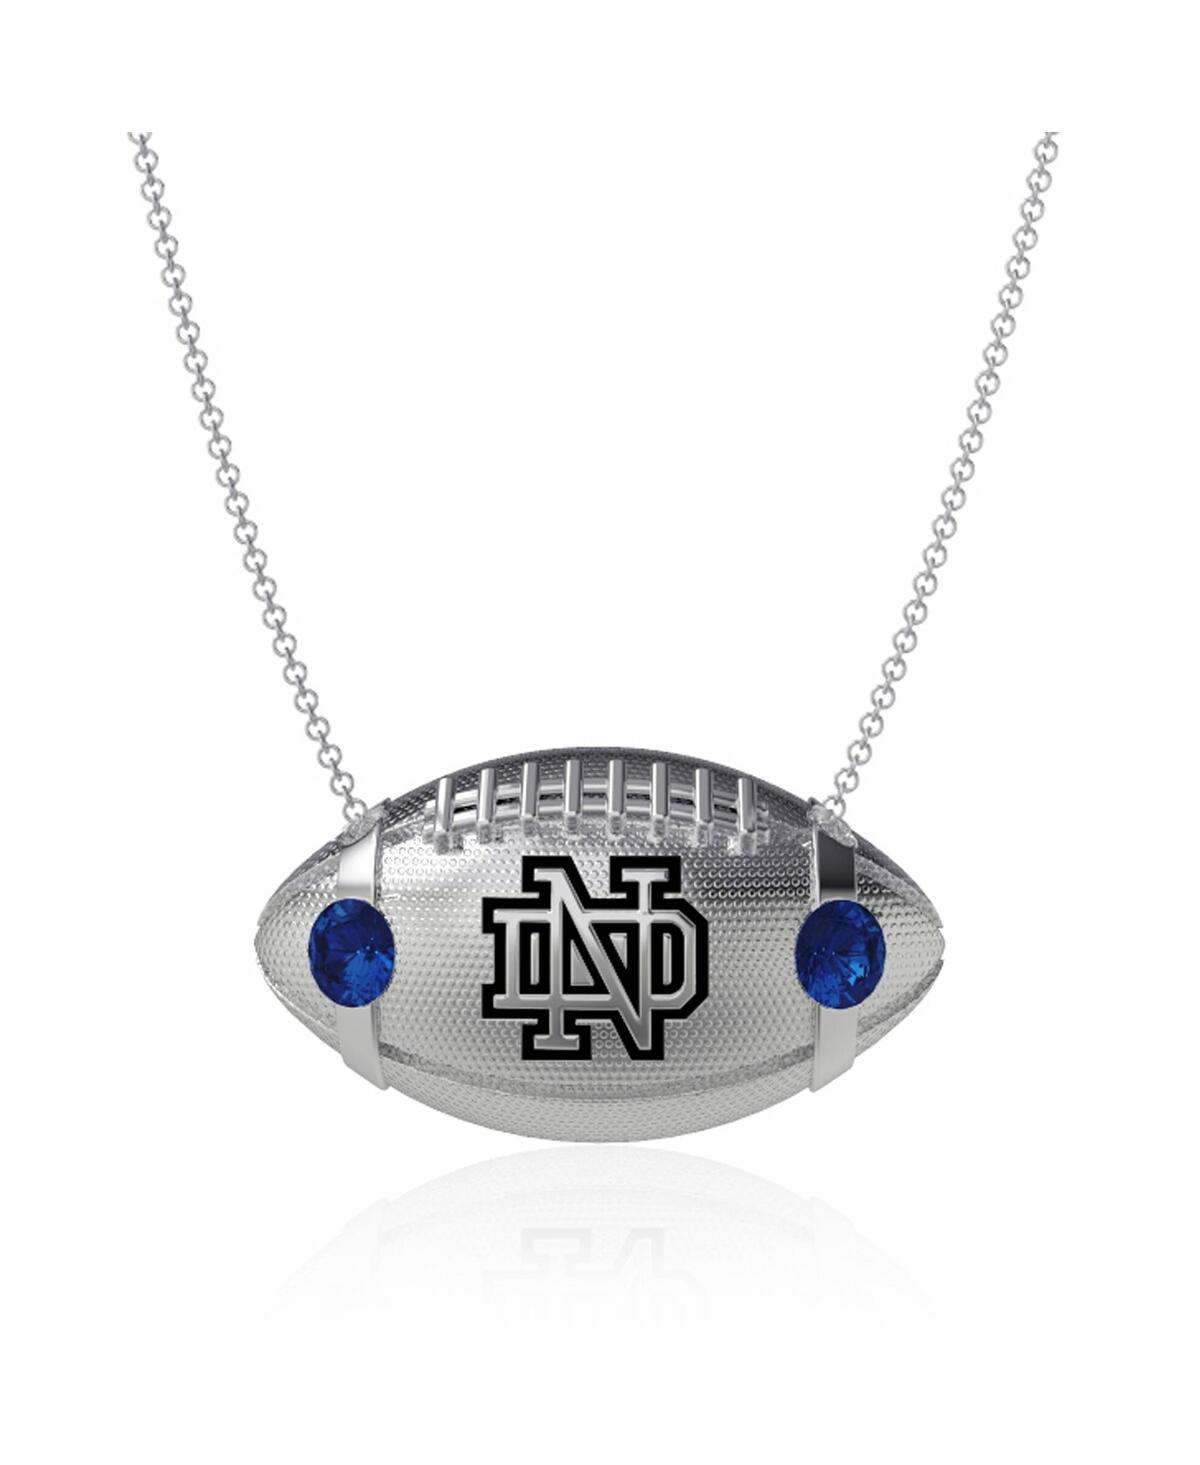 Dayna Designs Women's  Notre Dame Fighting Irish Football Necklace In Silver,blue